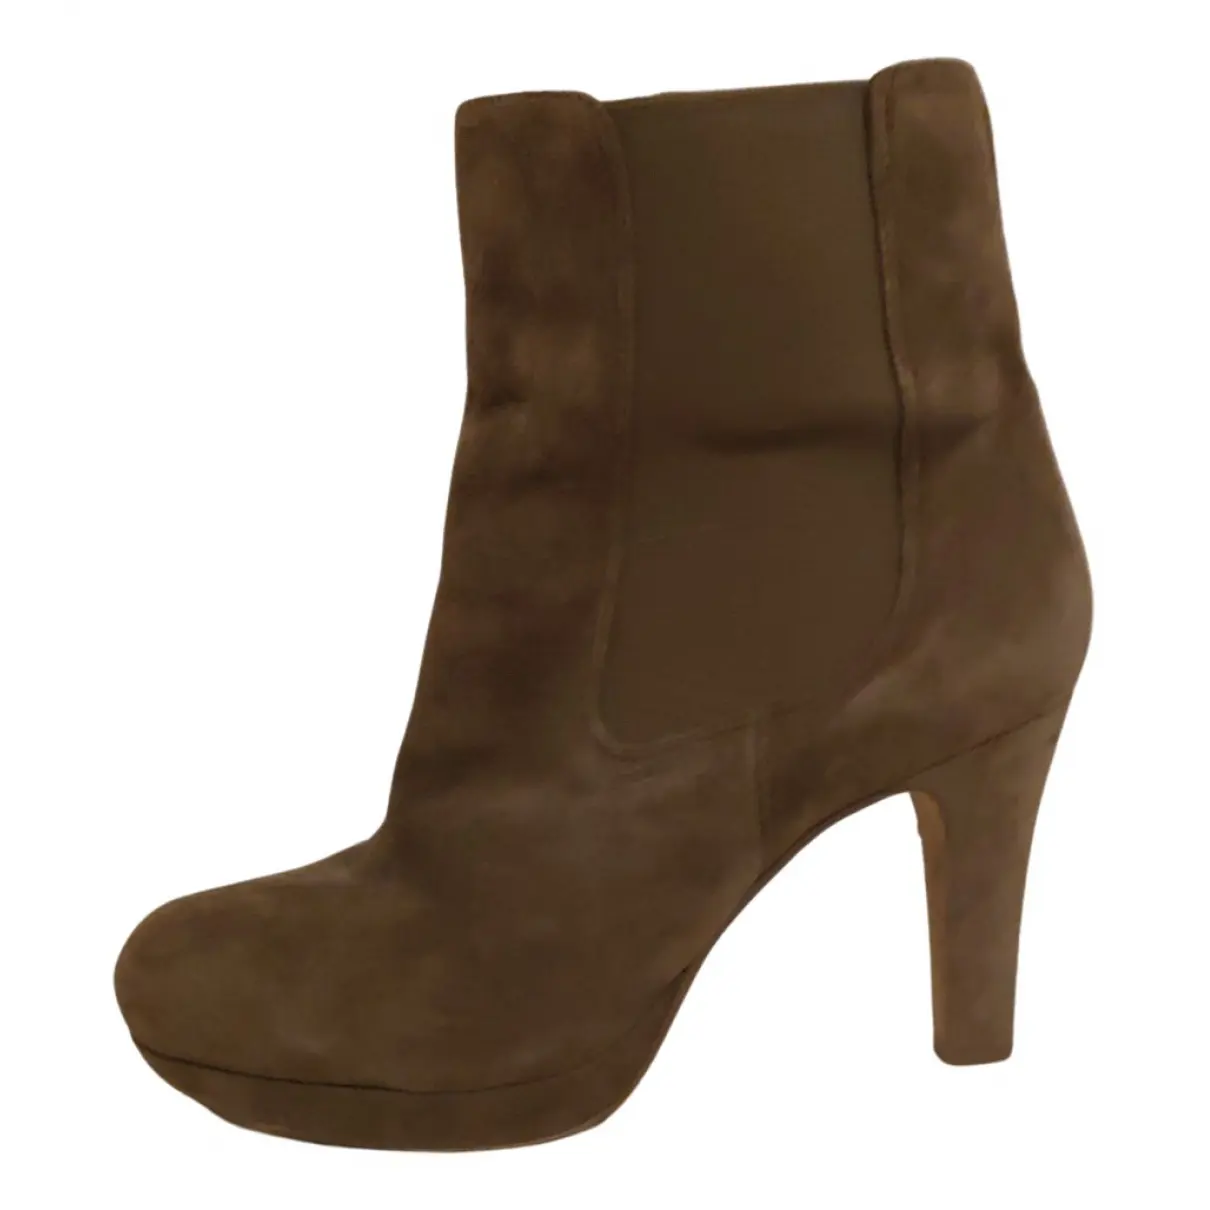 Ankle boots Clarks